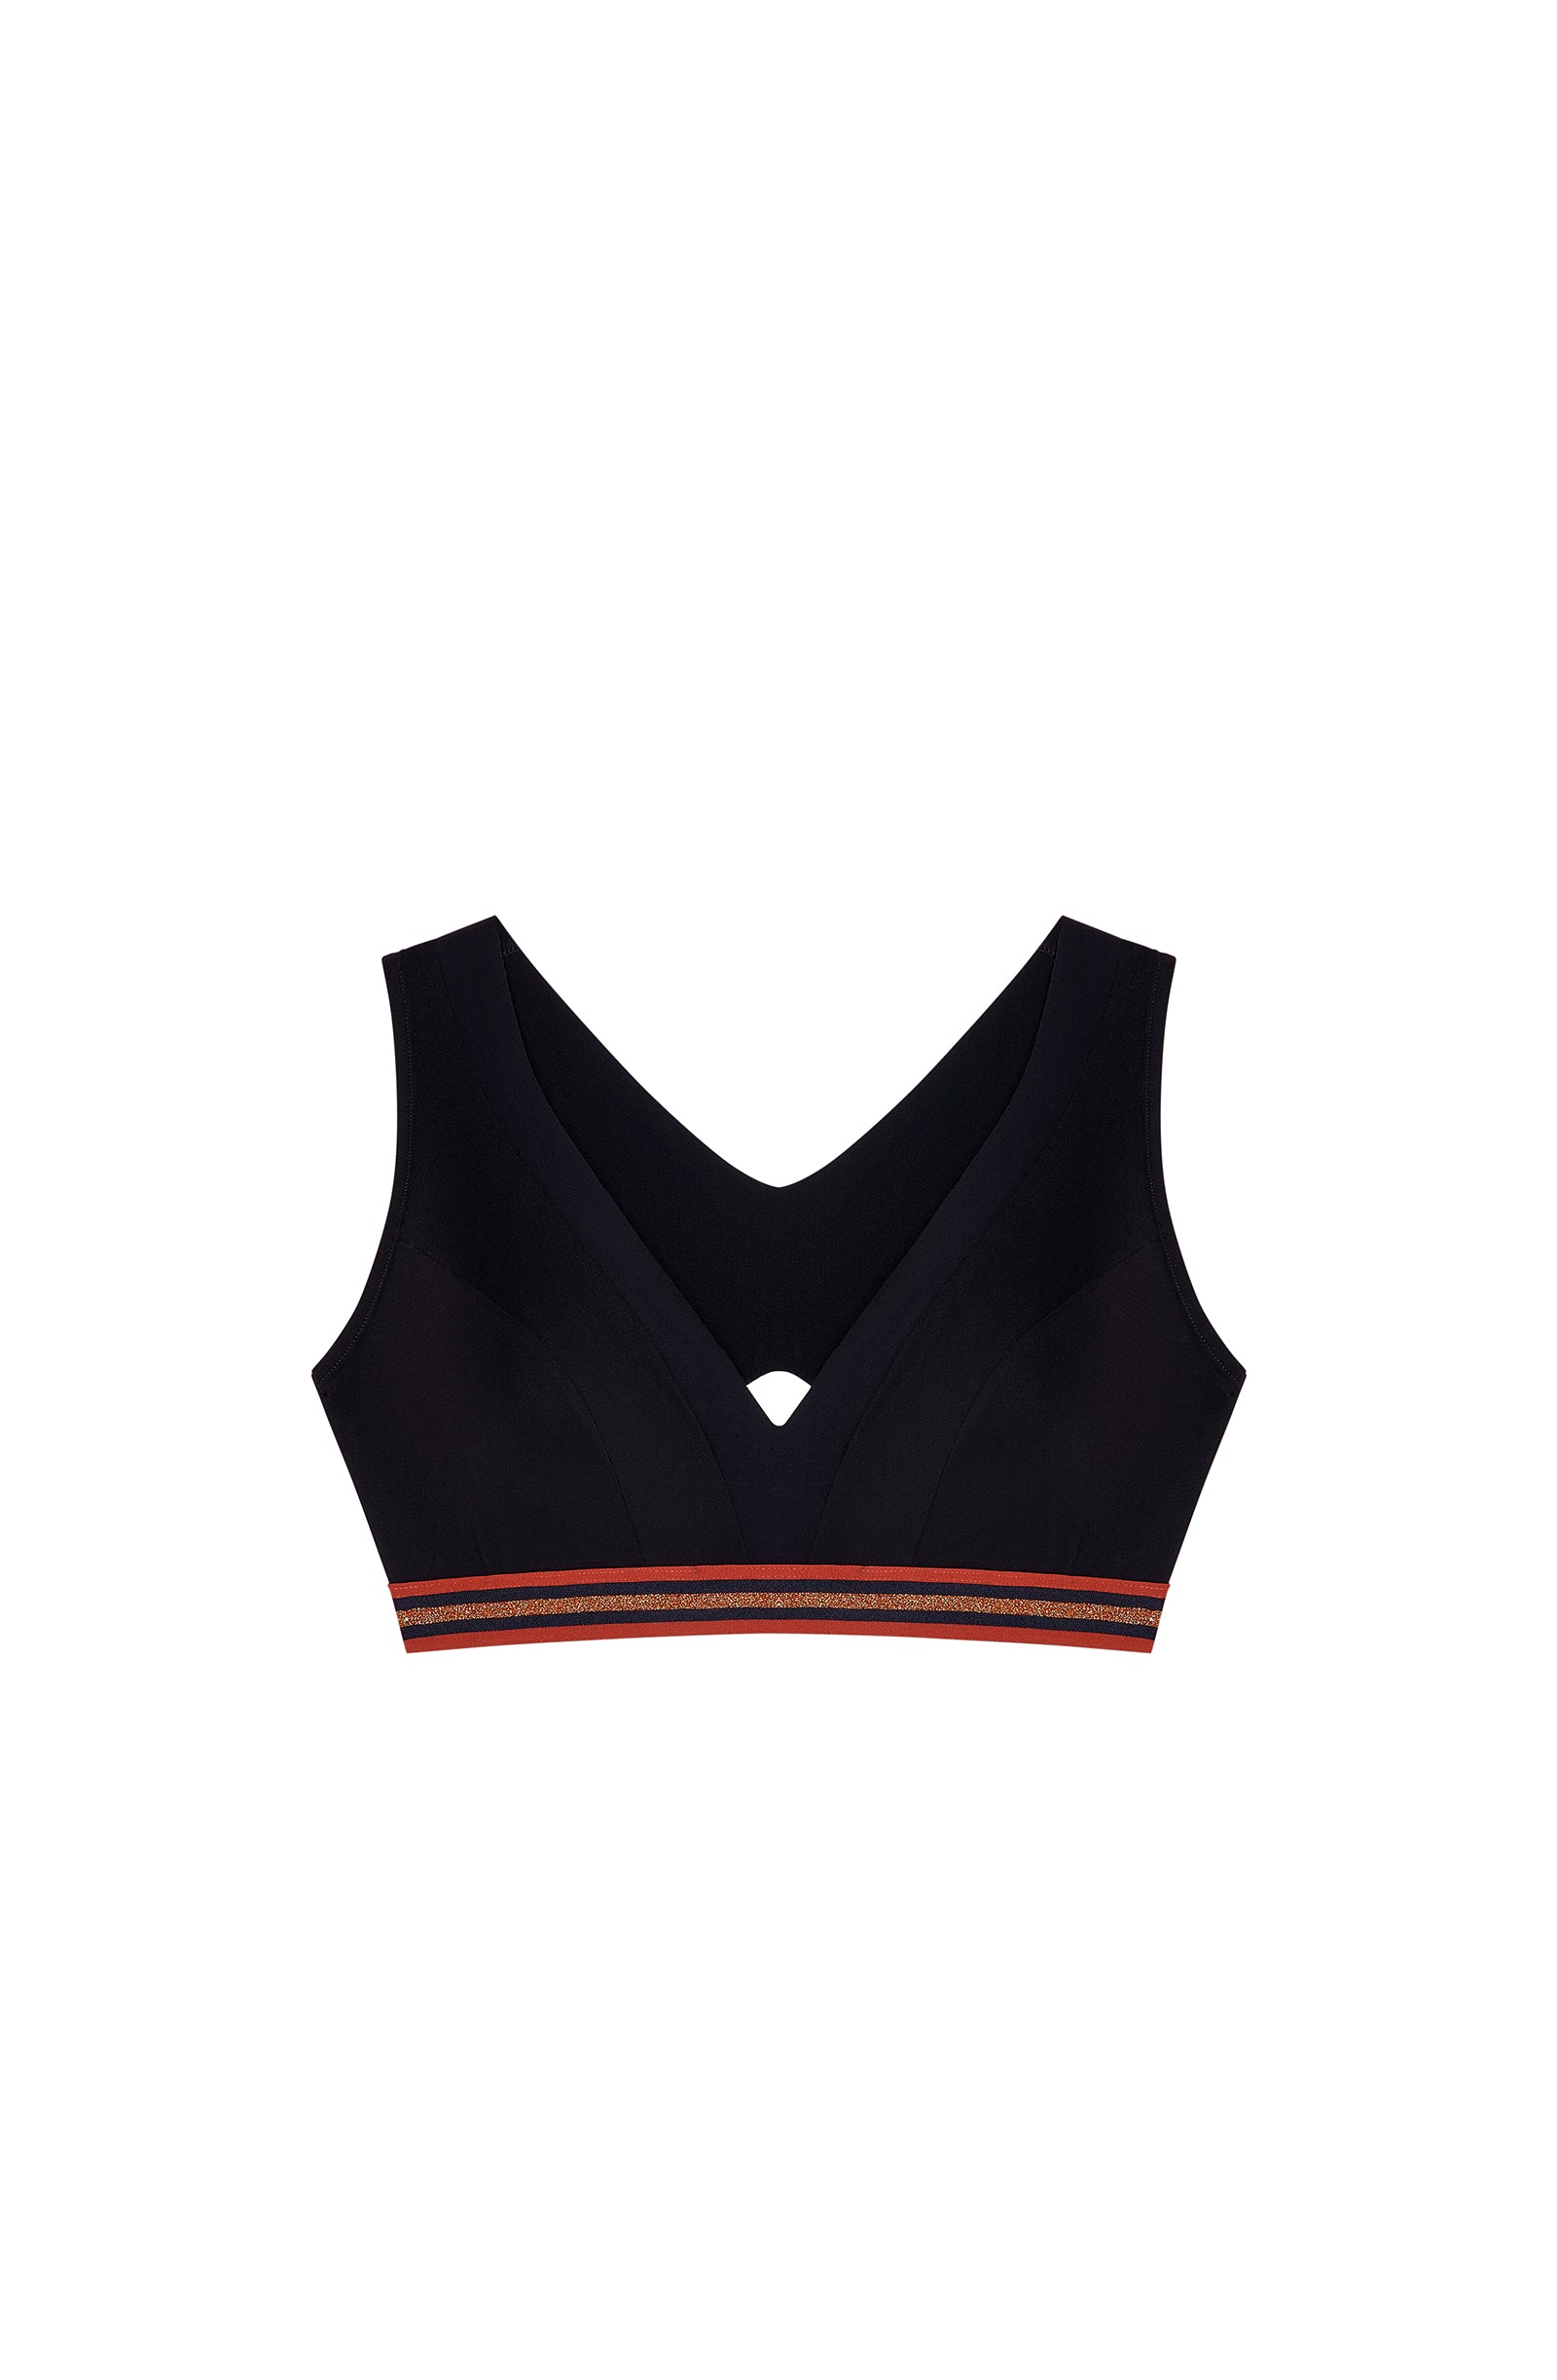 bass Black sports bra with an elastic band under the breasts